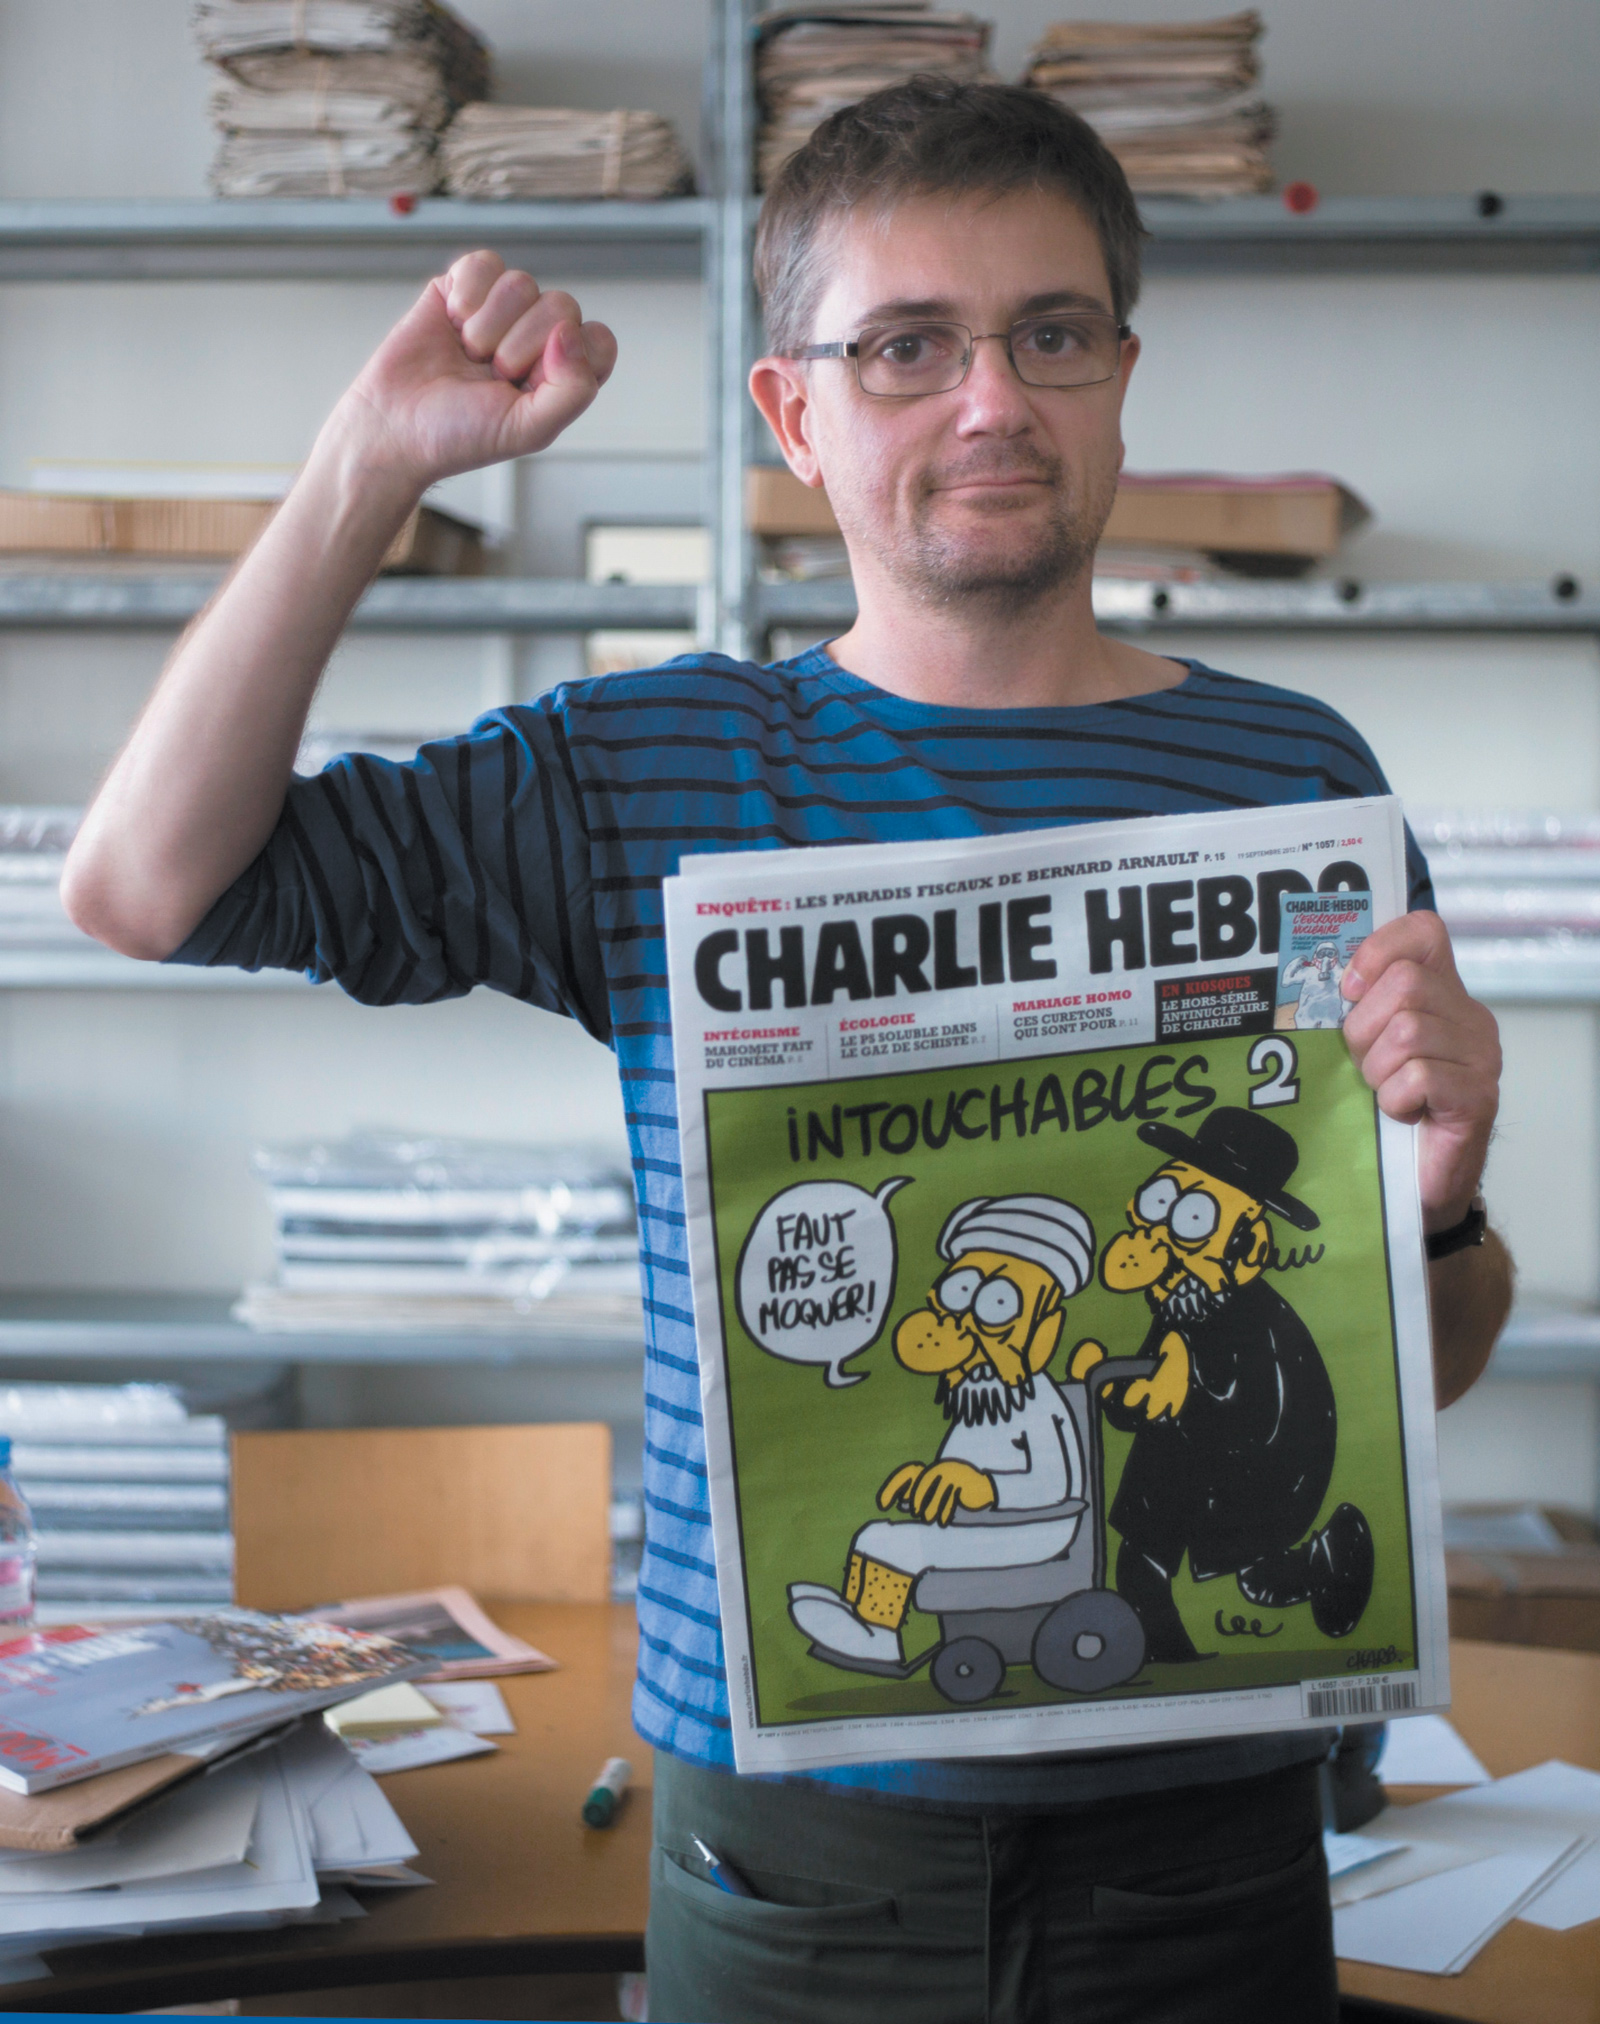 Stéphane Charbonnier, known as Charb, the editor in chief of Charlie Hebdo from 2005 until his death in 2015, at the magazine’s office in Paris, September 2012